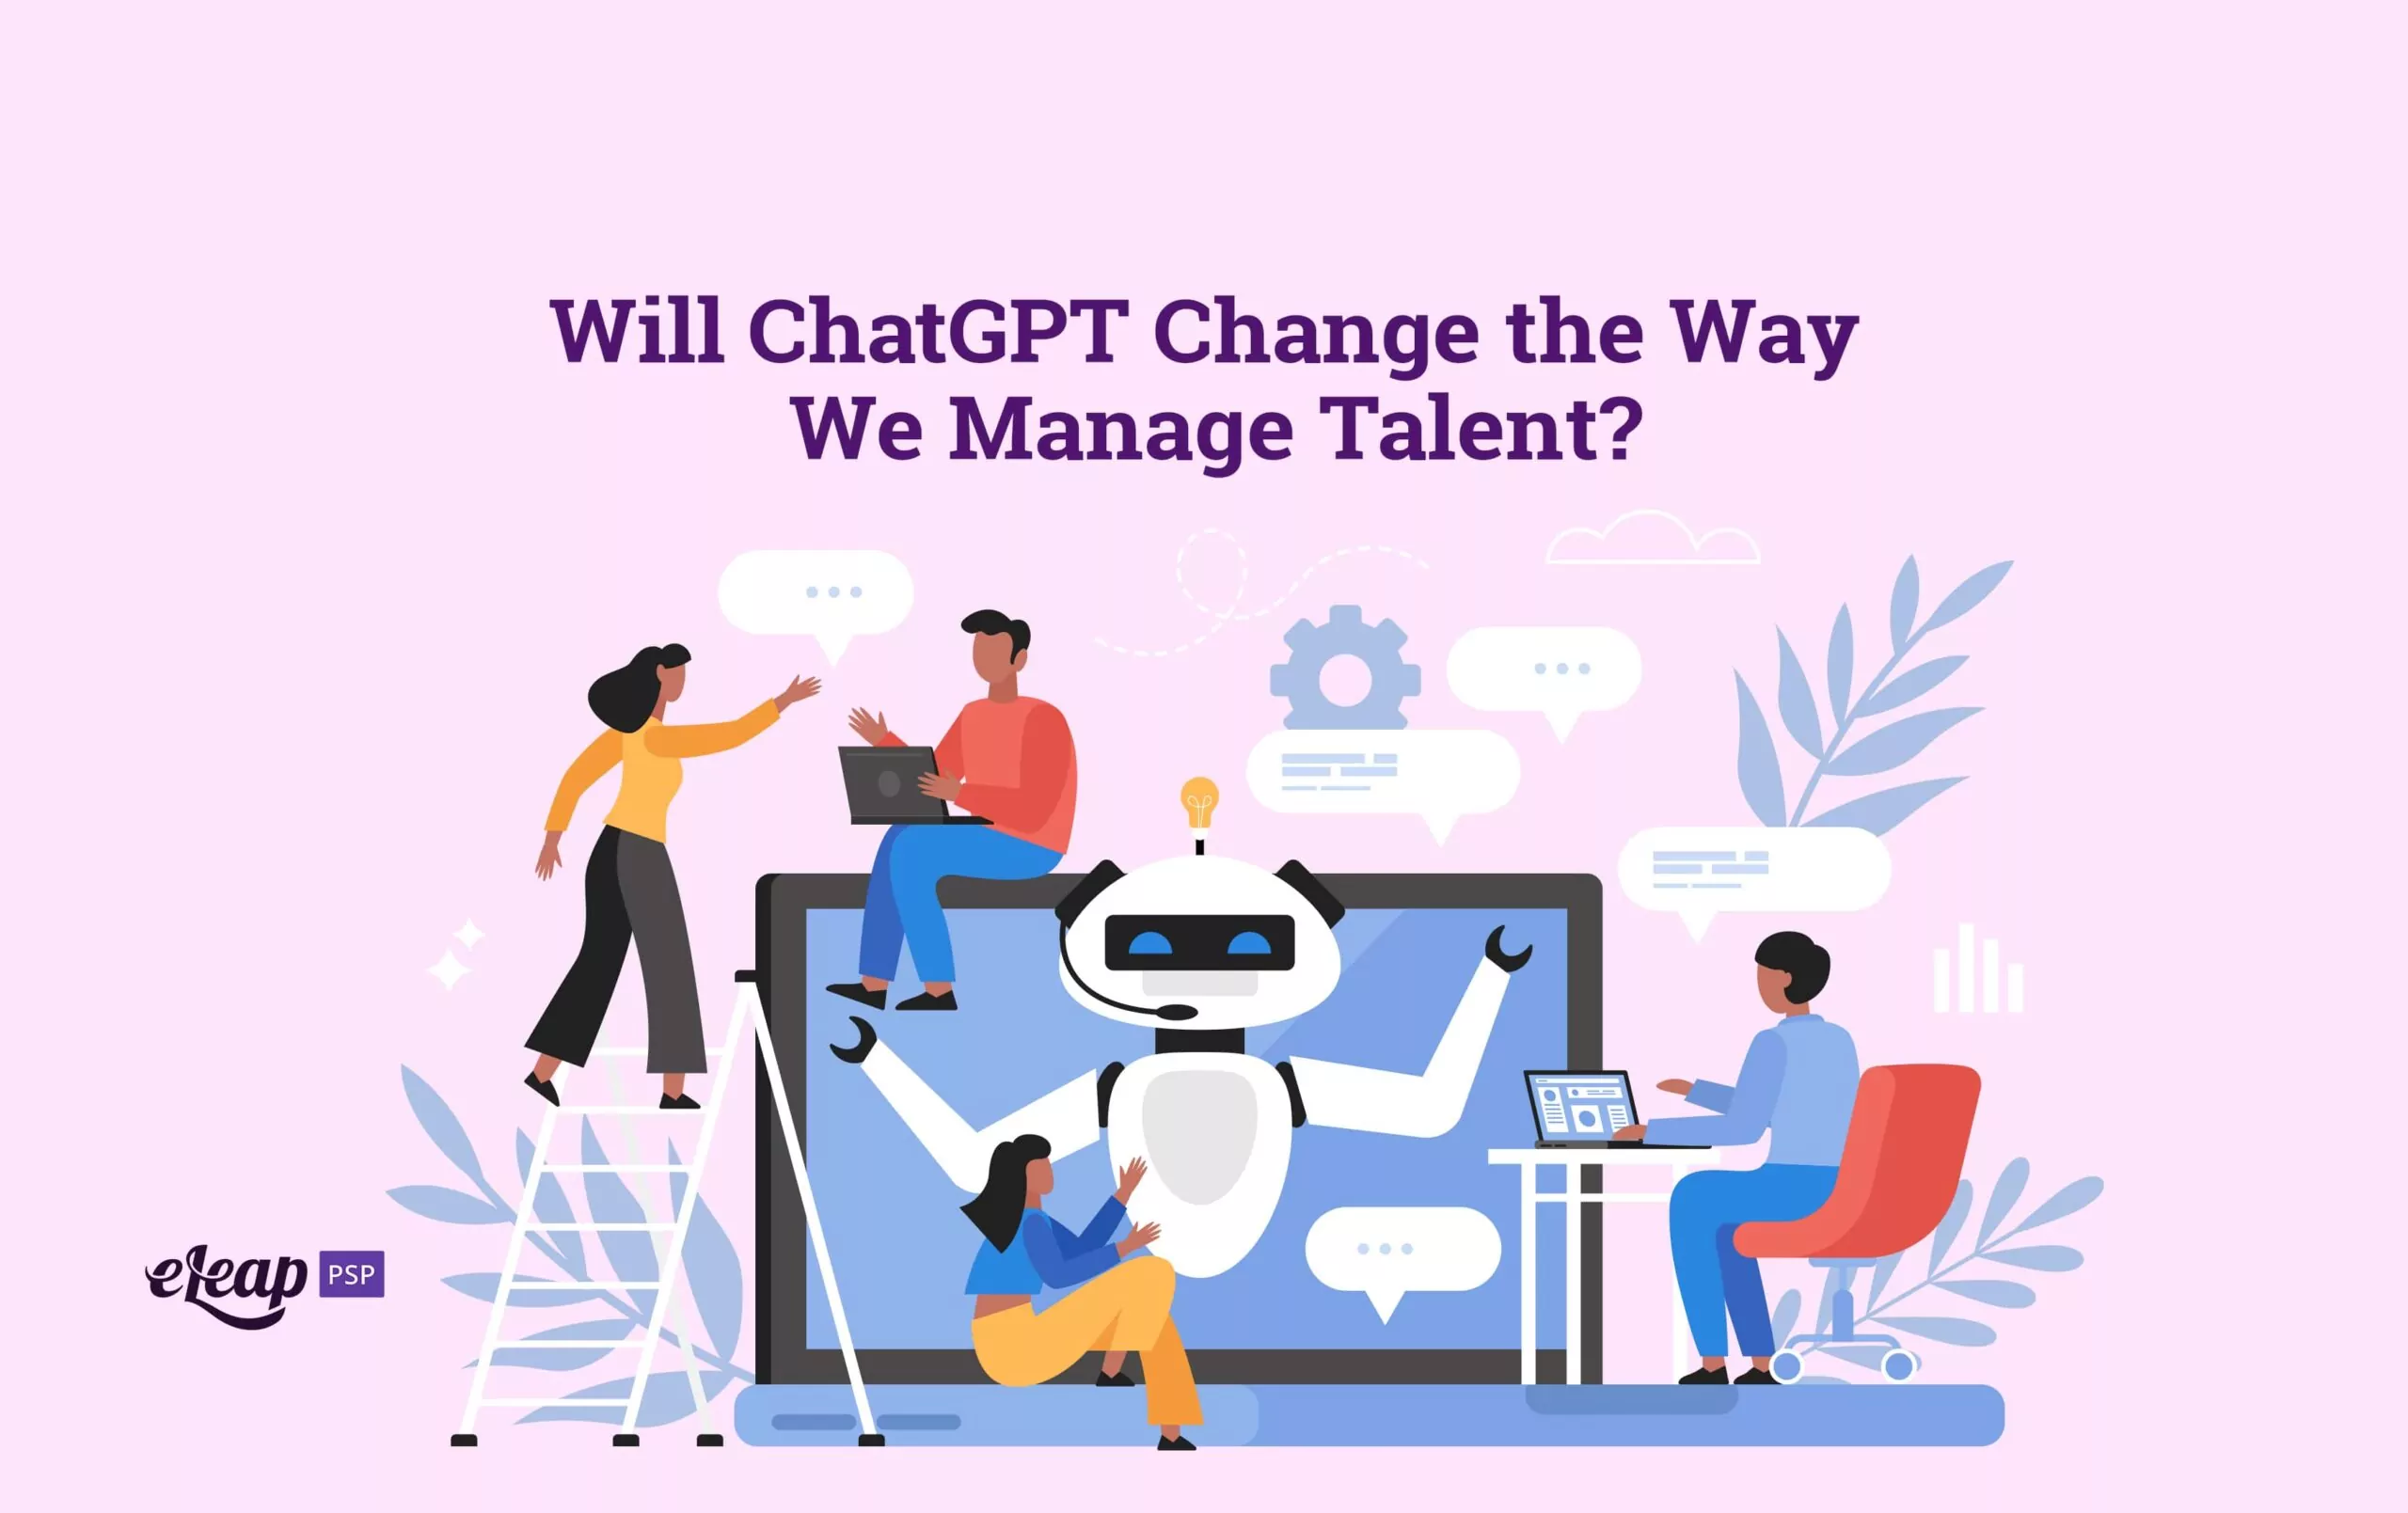 Will ChatGPT Change the Way We Manage Talent?